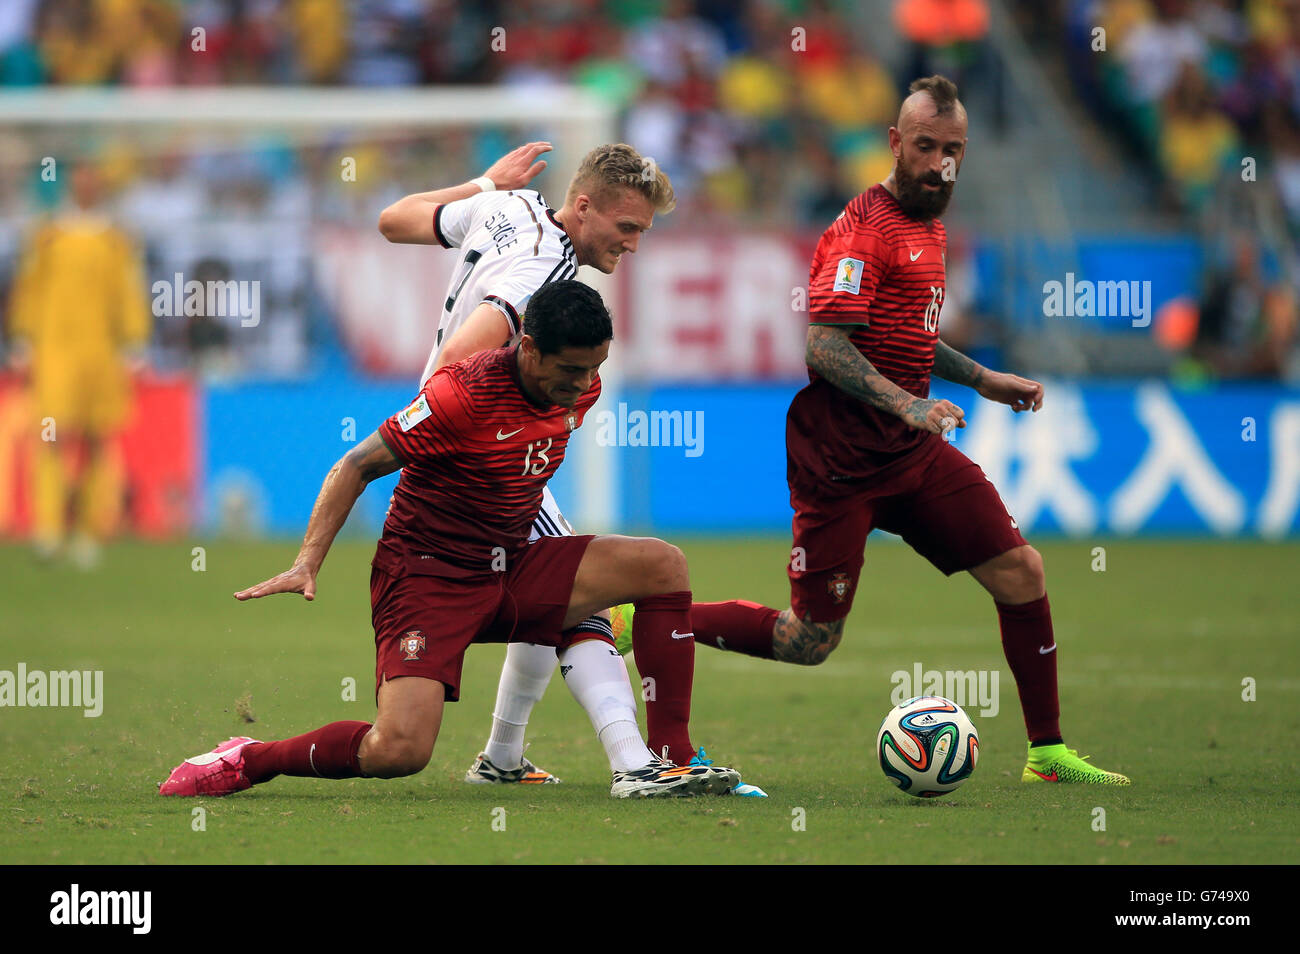 Soccer - FIFA World Cup 2014 - Group G - Germany v Portugal - Arena Fonte Nova. Germany's Andre Schurrle and Portugal's Ricardo Costa (left) Stock Photo